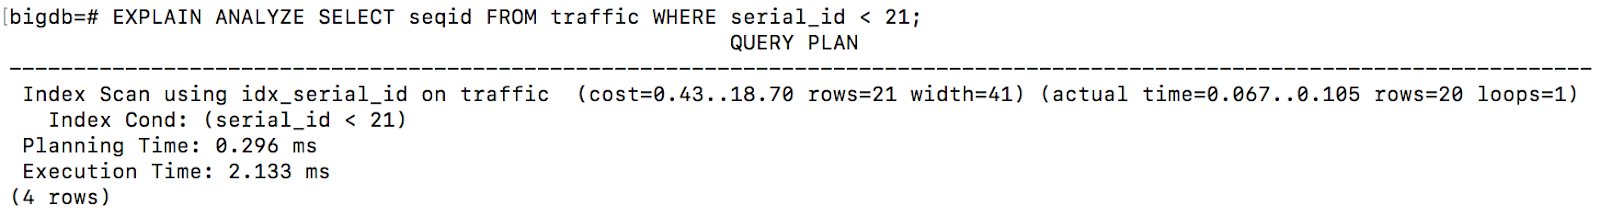 Image showing an example query plan using explain analyze